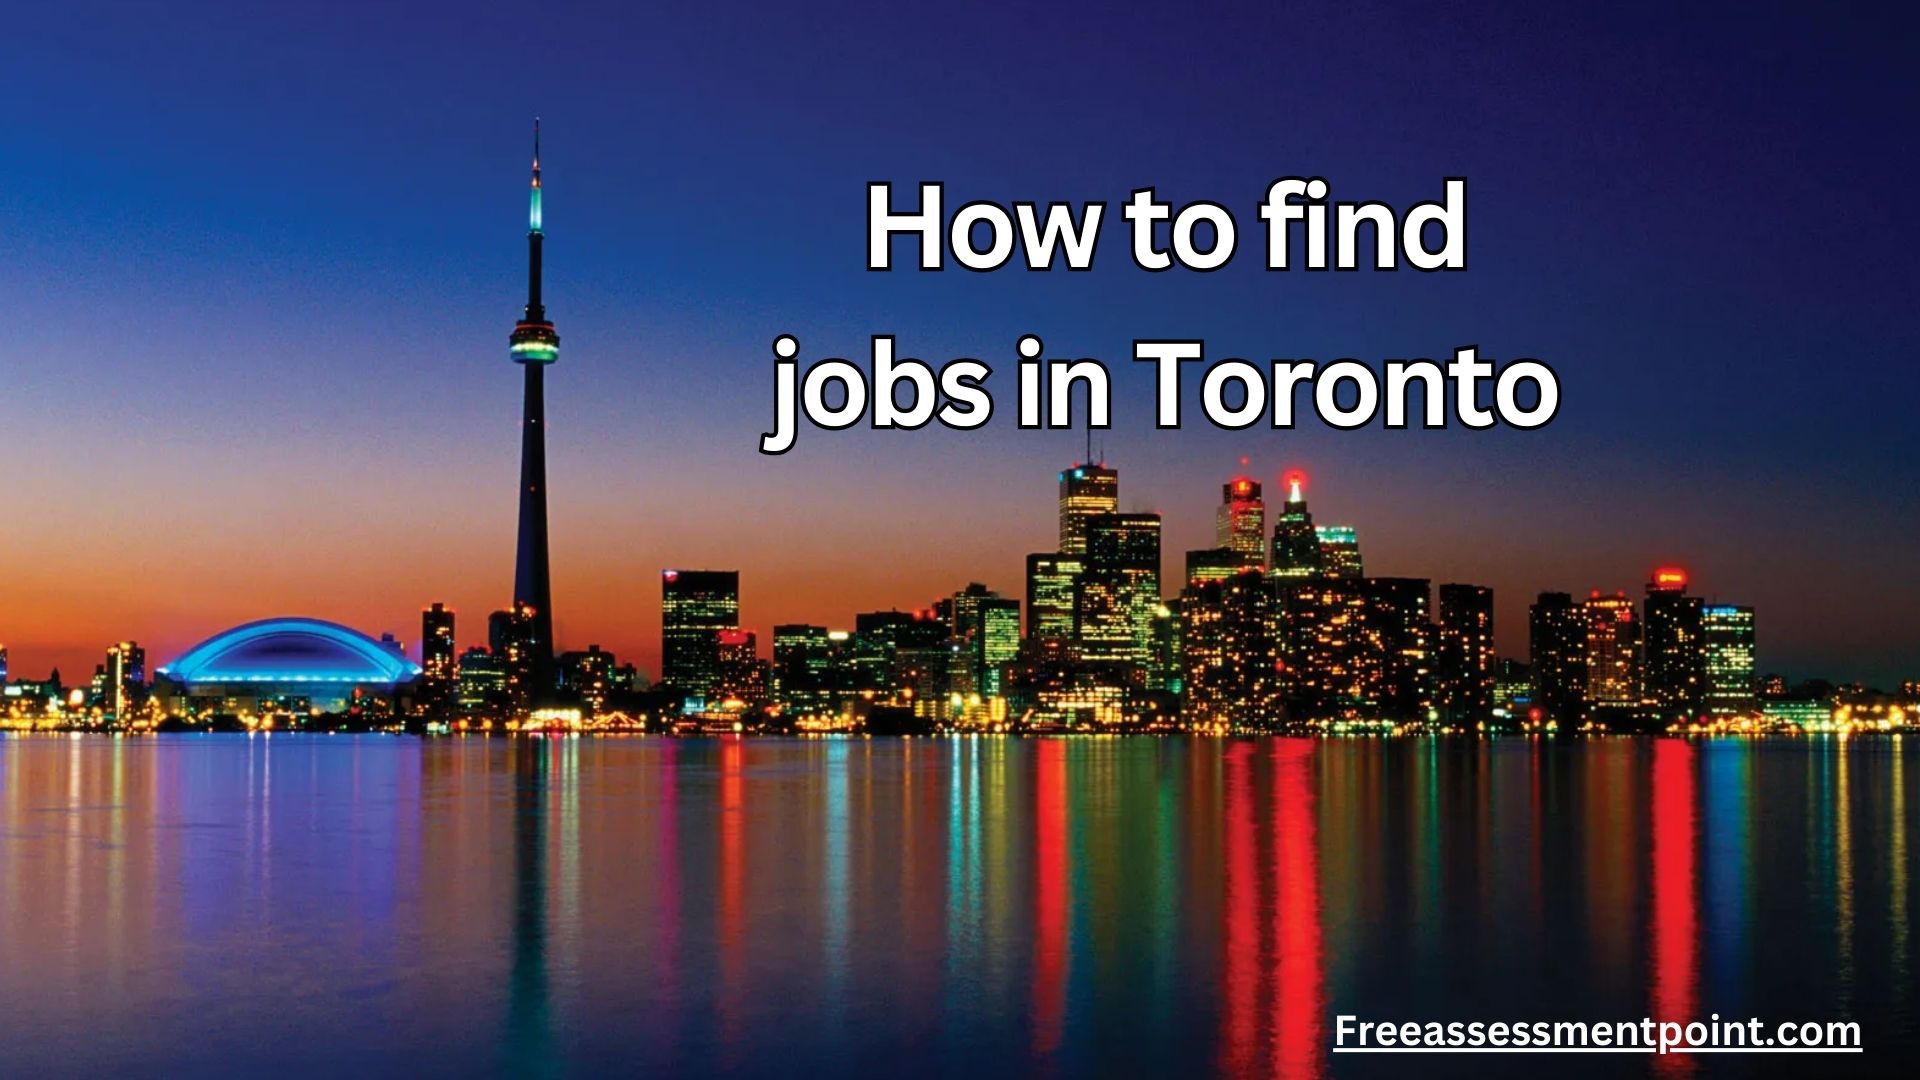 How to find jobs in Toronto